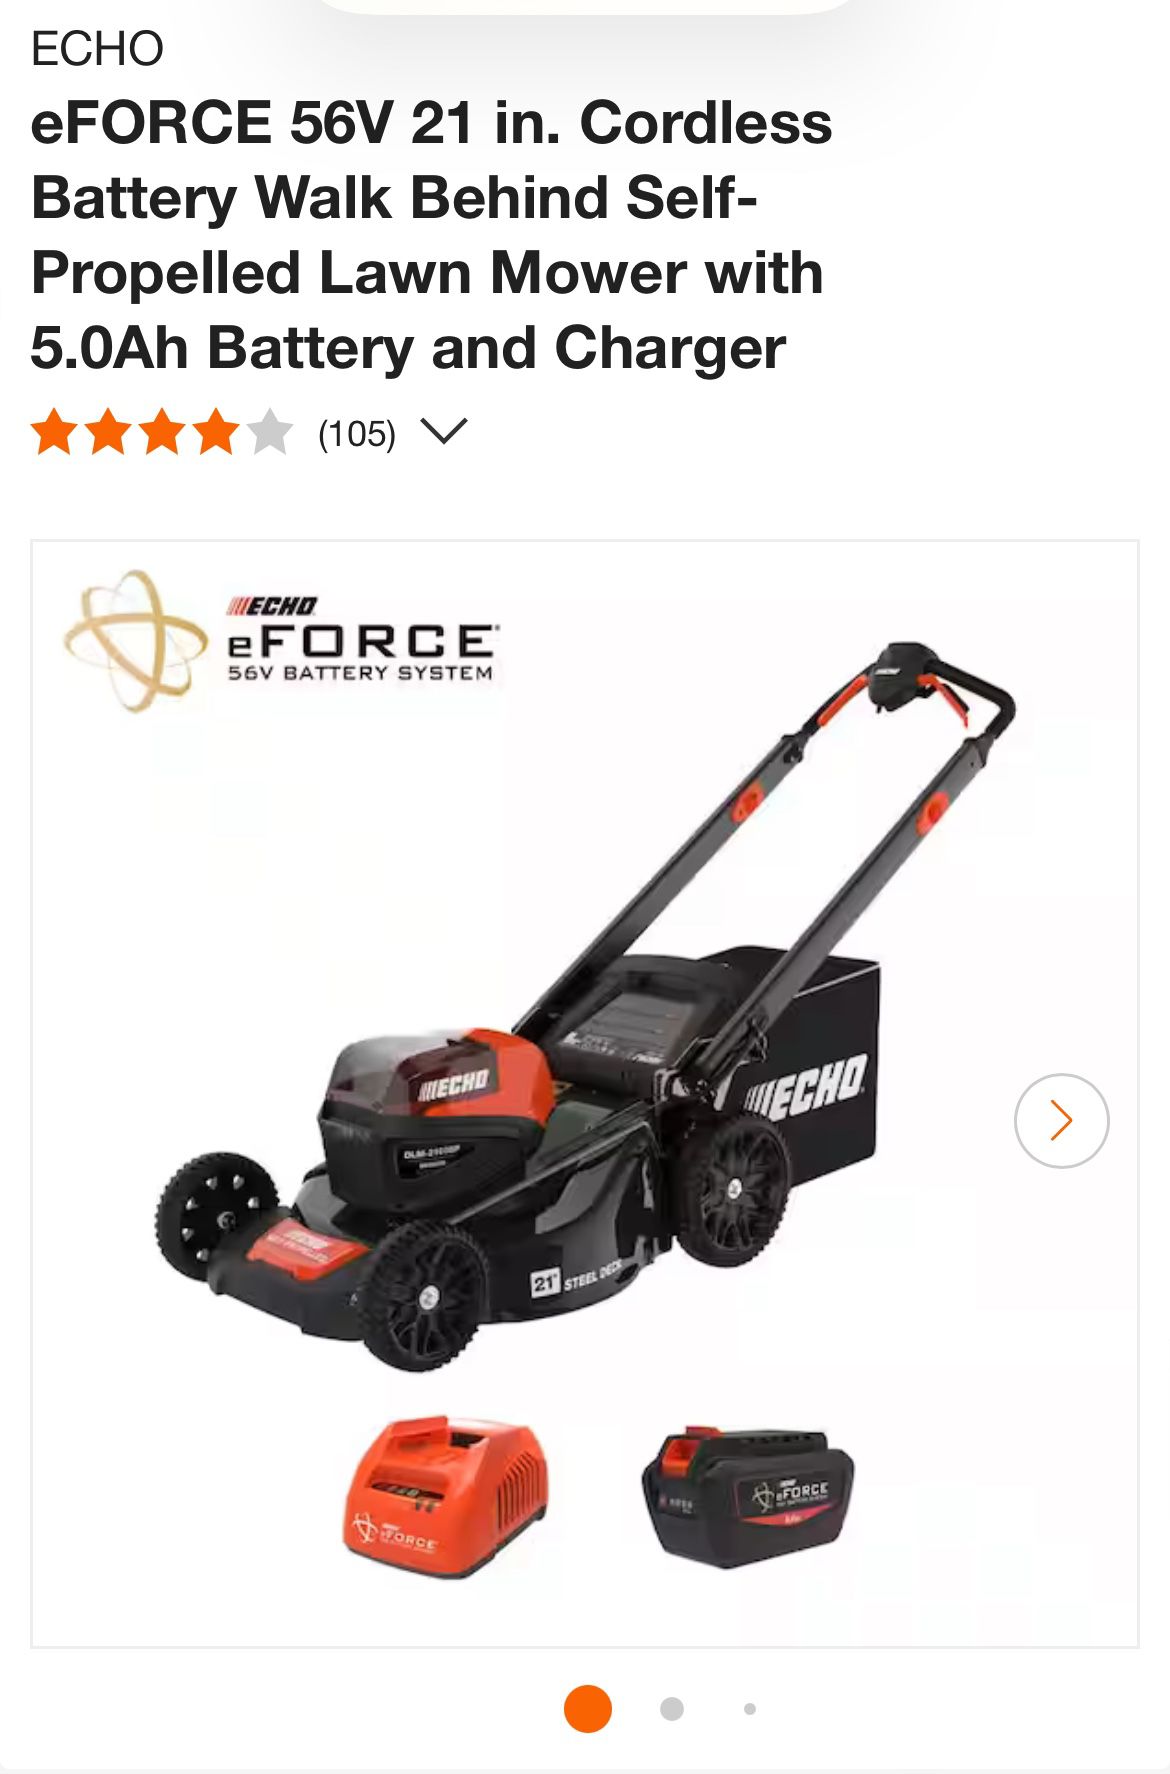 Echo eFORCE 56V 21 in. Cordless Battery Walk Behind Self-Propelled Lawn Mower with 5.0Ah Battery and Charger